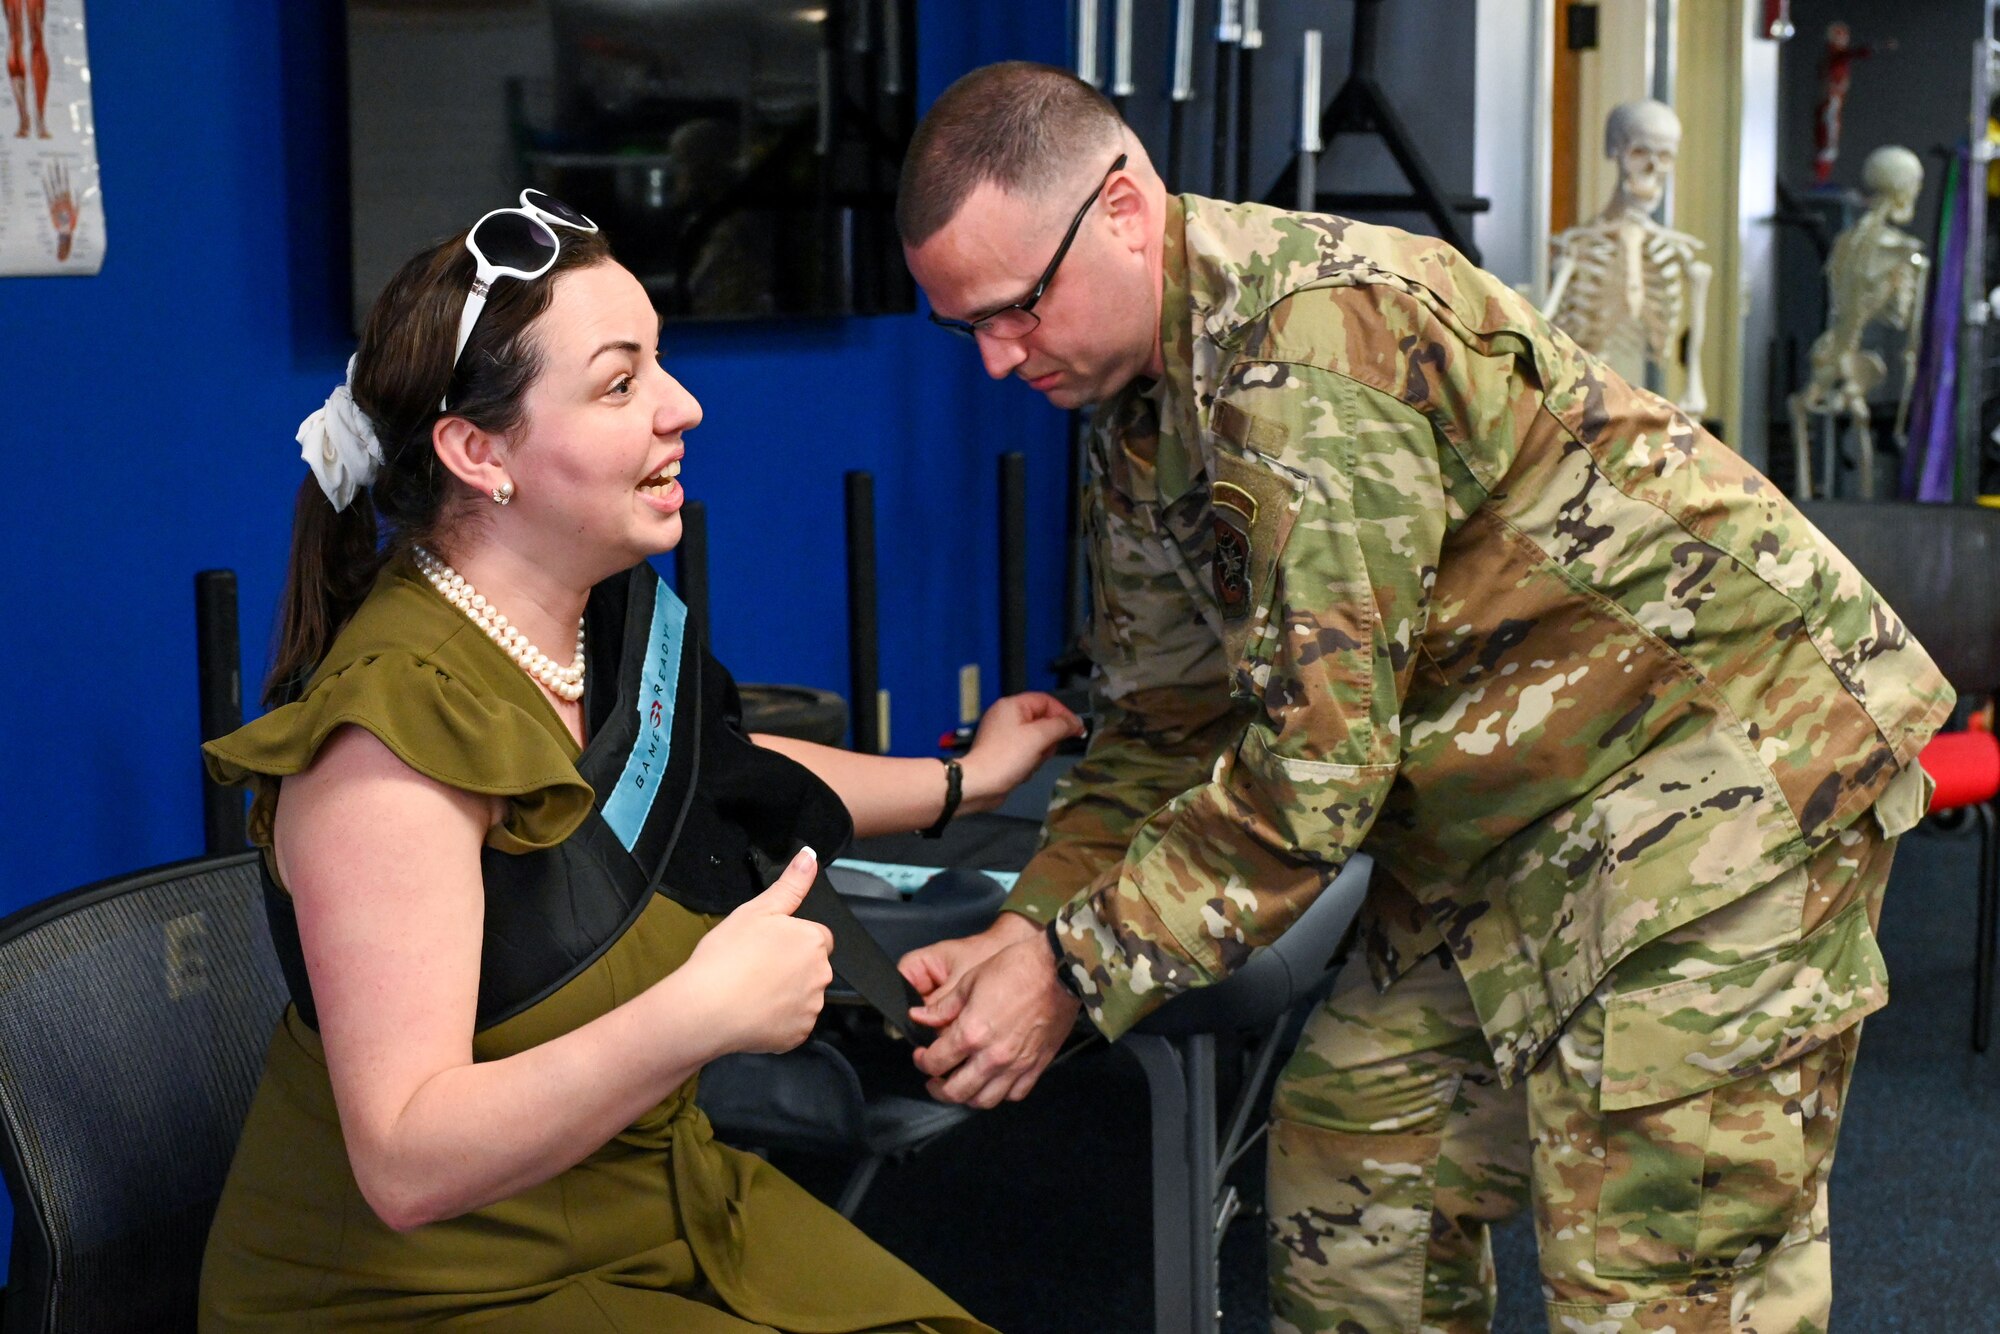 An Airman applies a cooling device to someone's arm.